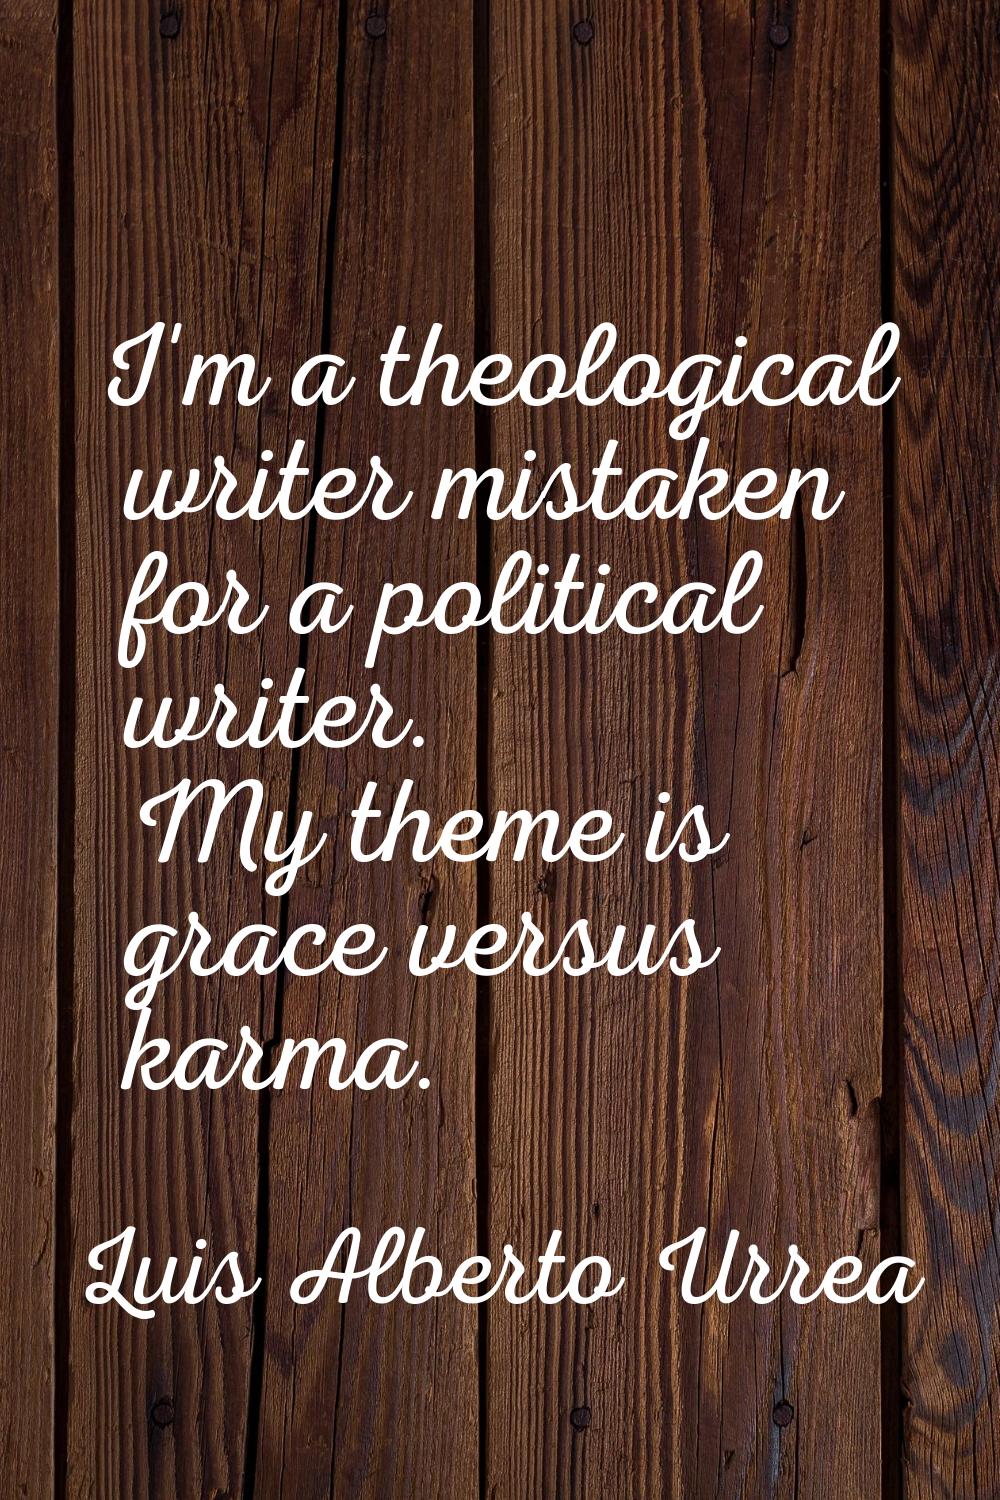 I'm a theological writer mistaken for a political writer. My theme is grace versus karma.